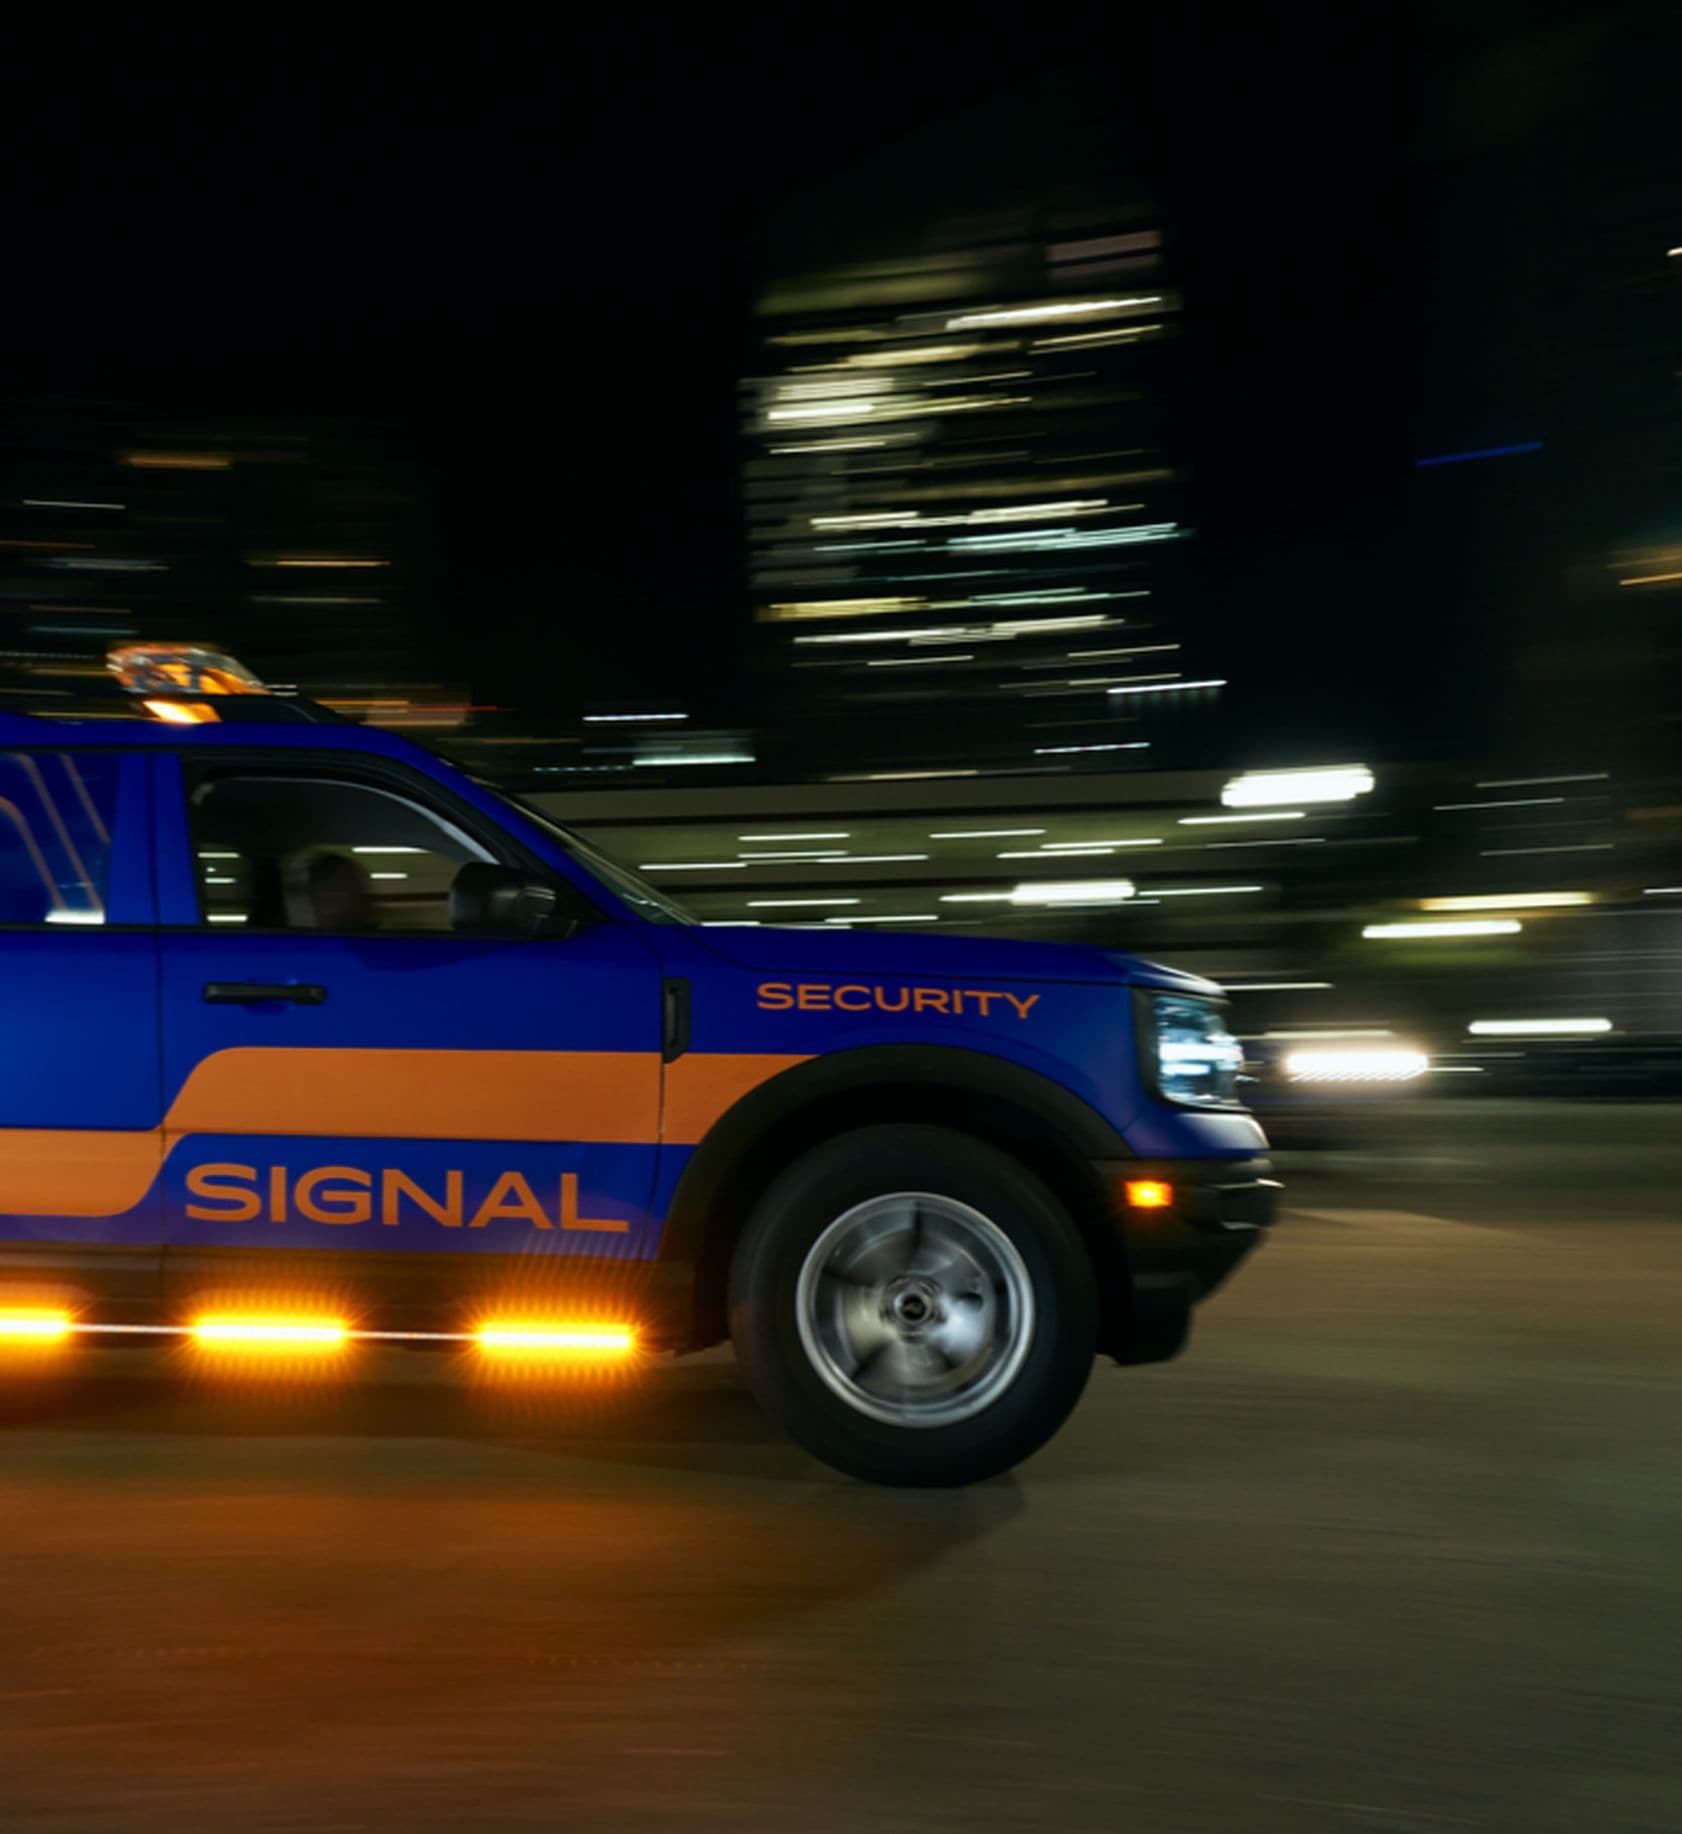 Signal Security patrol car driving down the street